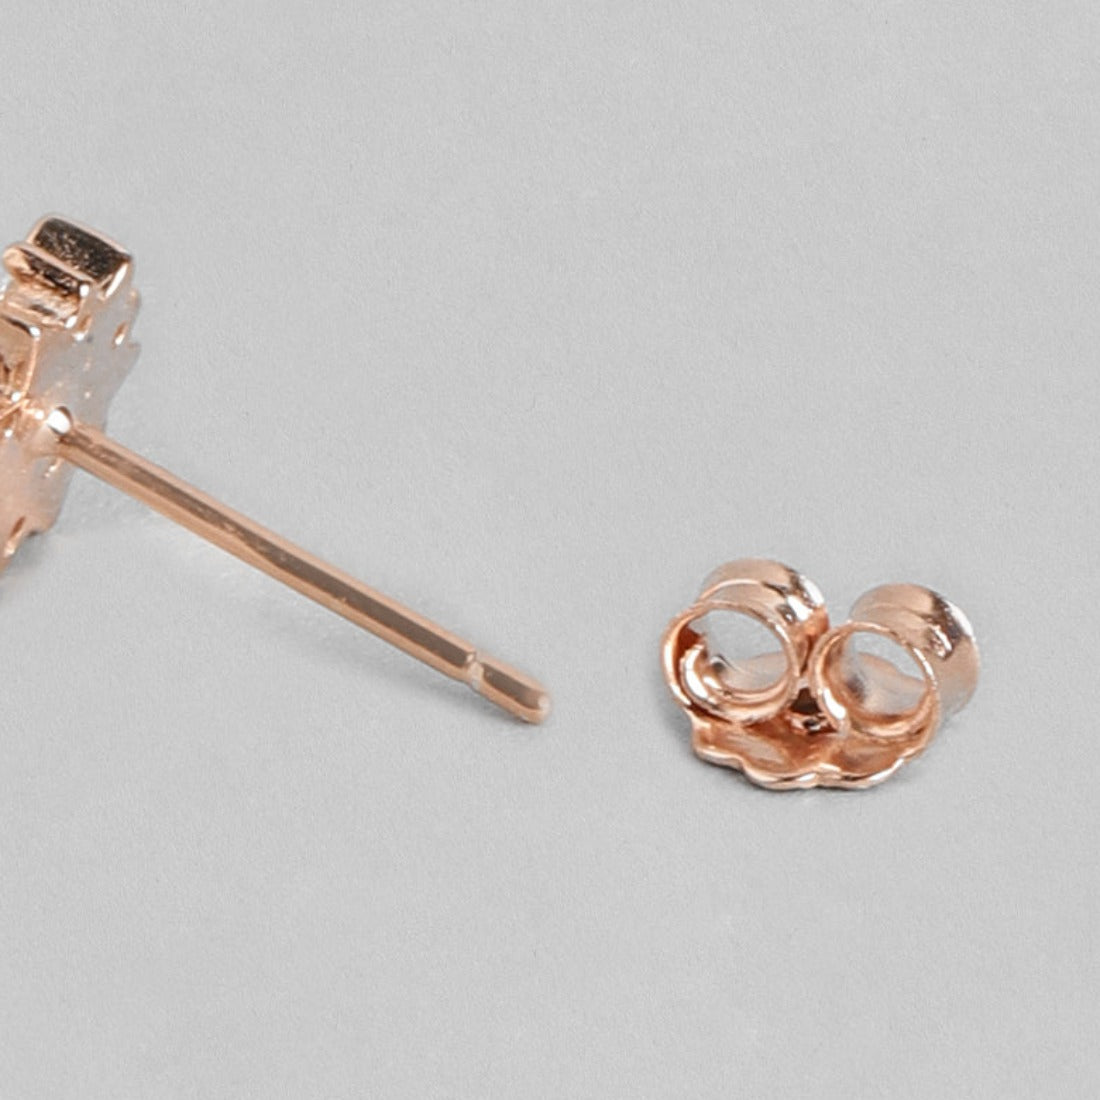 CZ Studded Floral Rose Gold 925 Sterling Silver Stud Earrings